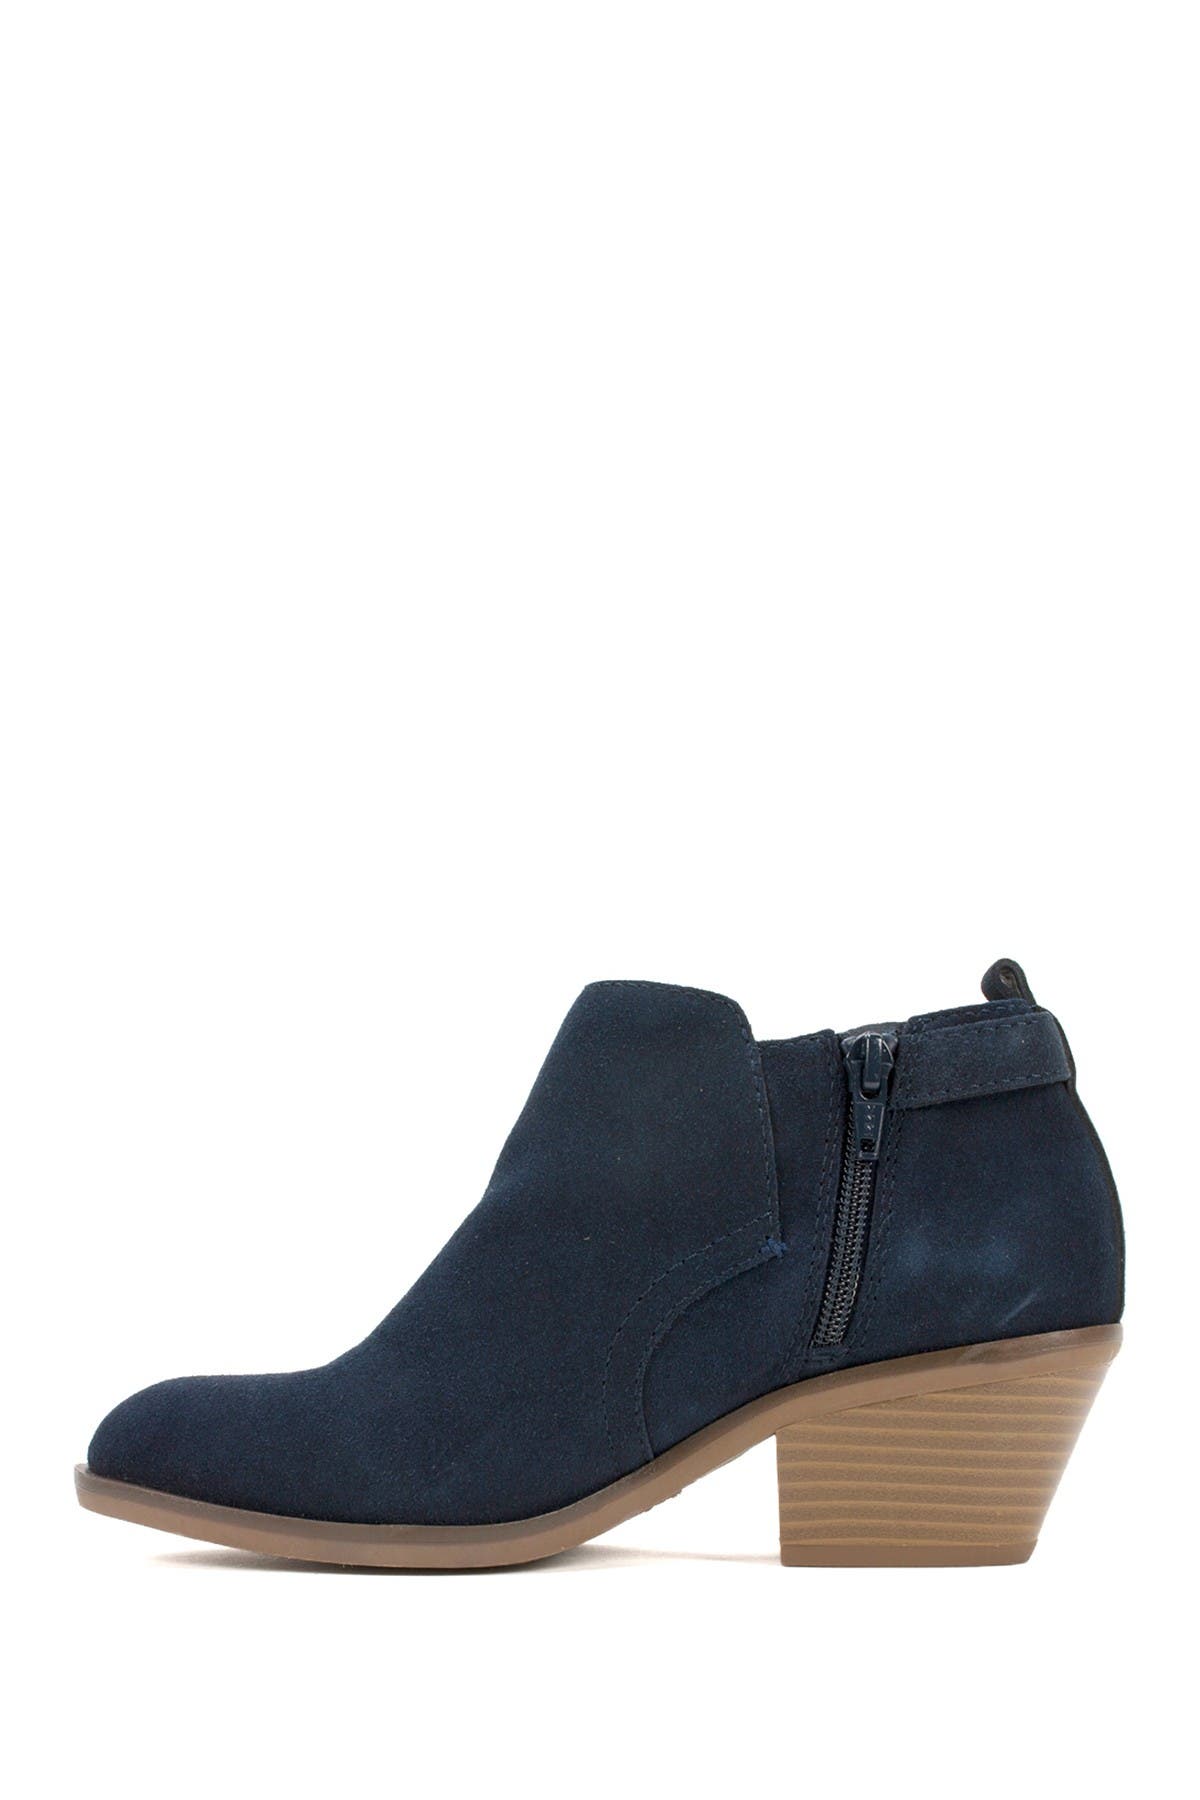 White Mountain Footwear Sadie Suede Ankle Bootie In Turquoise/aqua8